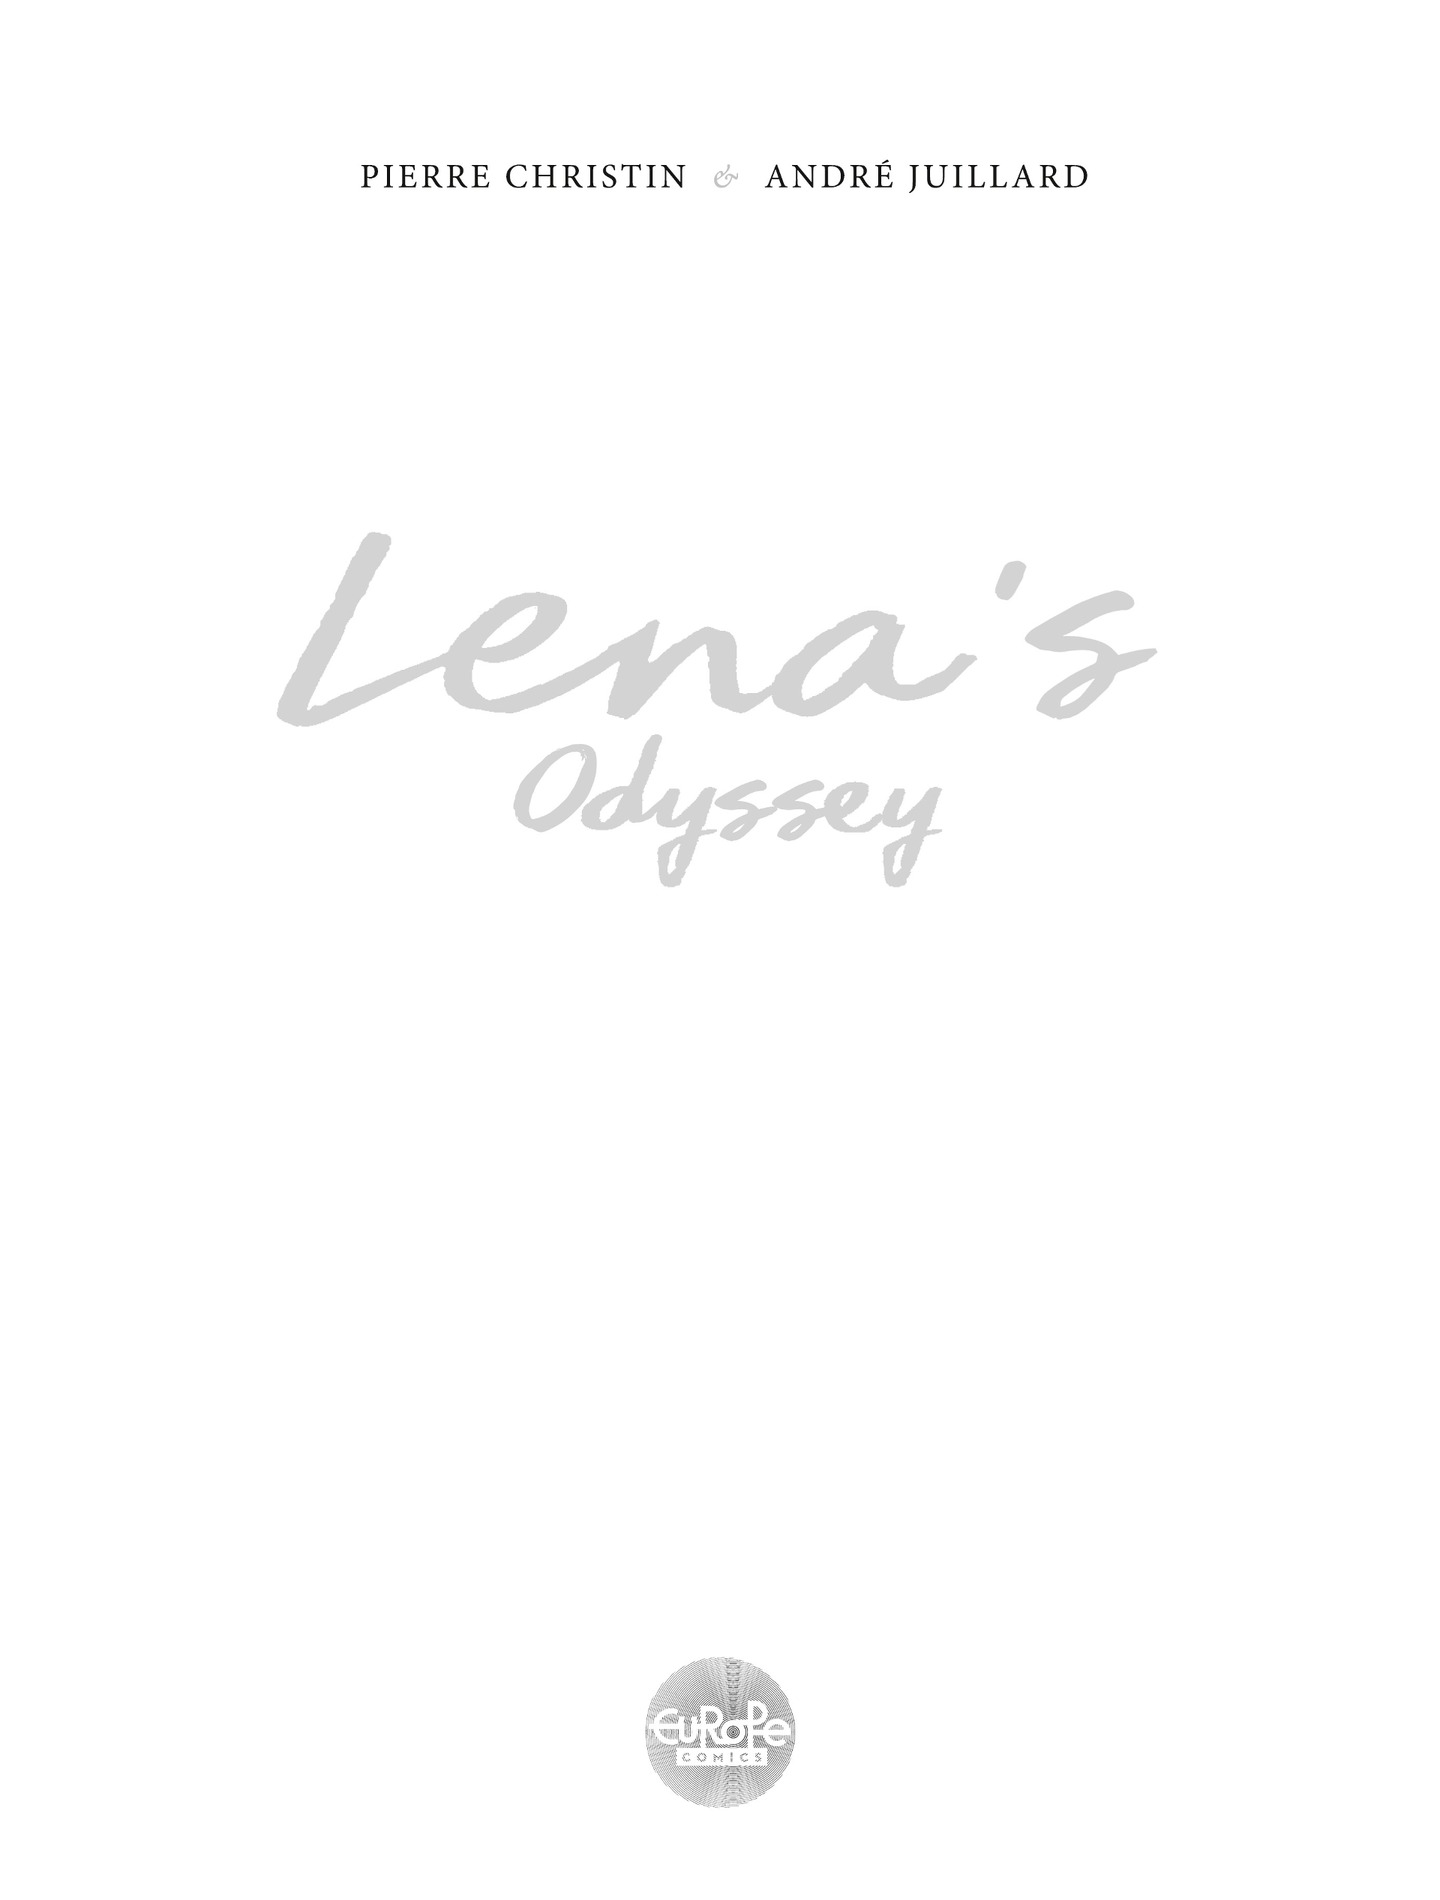 Read online Lena comic -  Issue #1 - 2